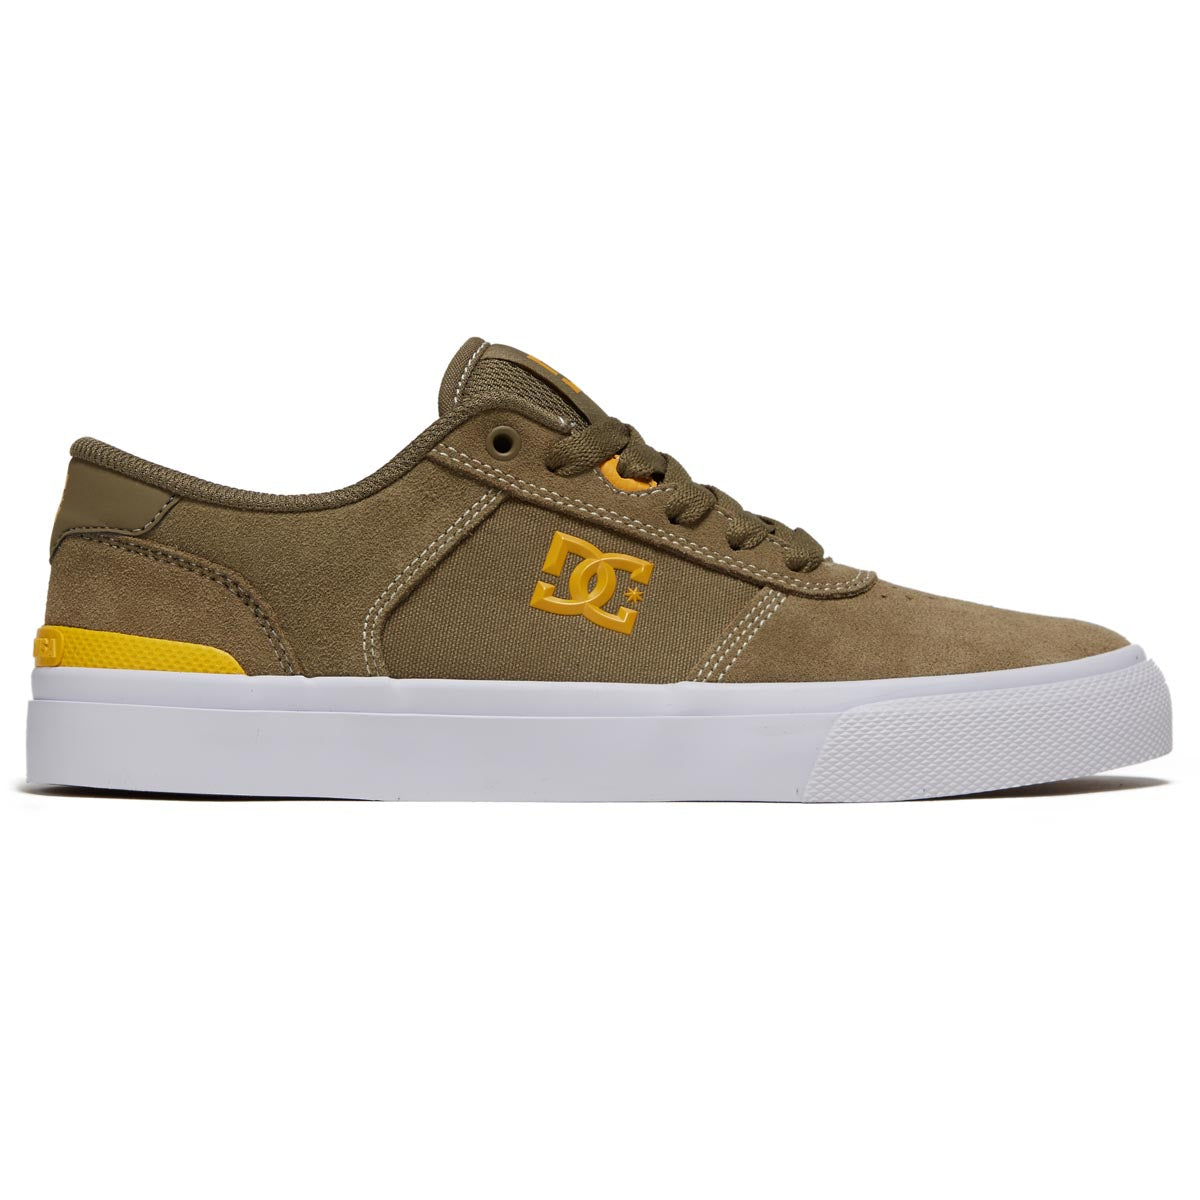 DC Teknic S Shoes - Army/Olive image 2